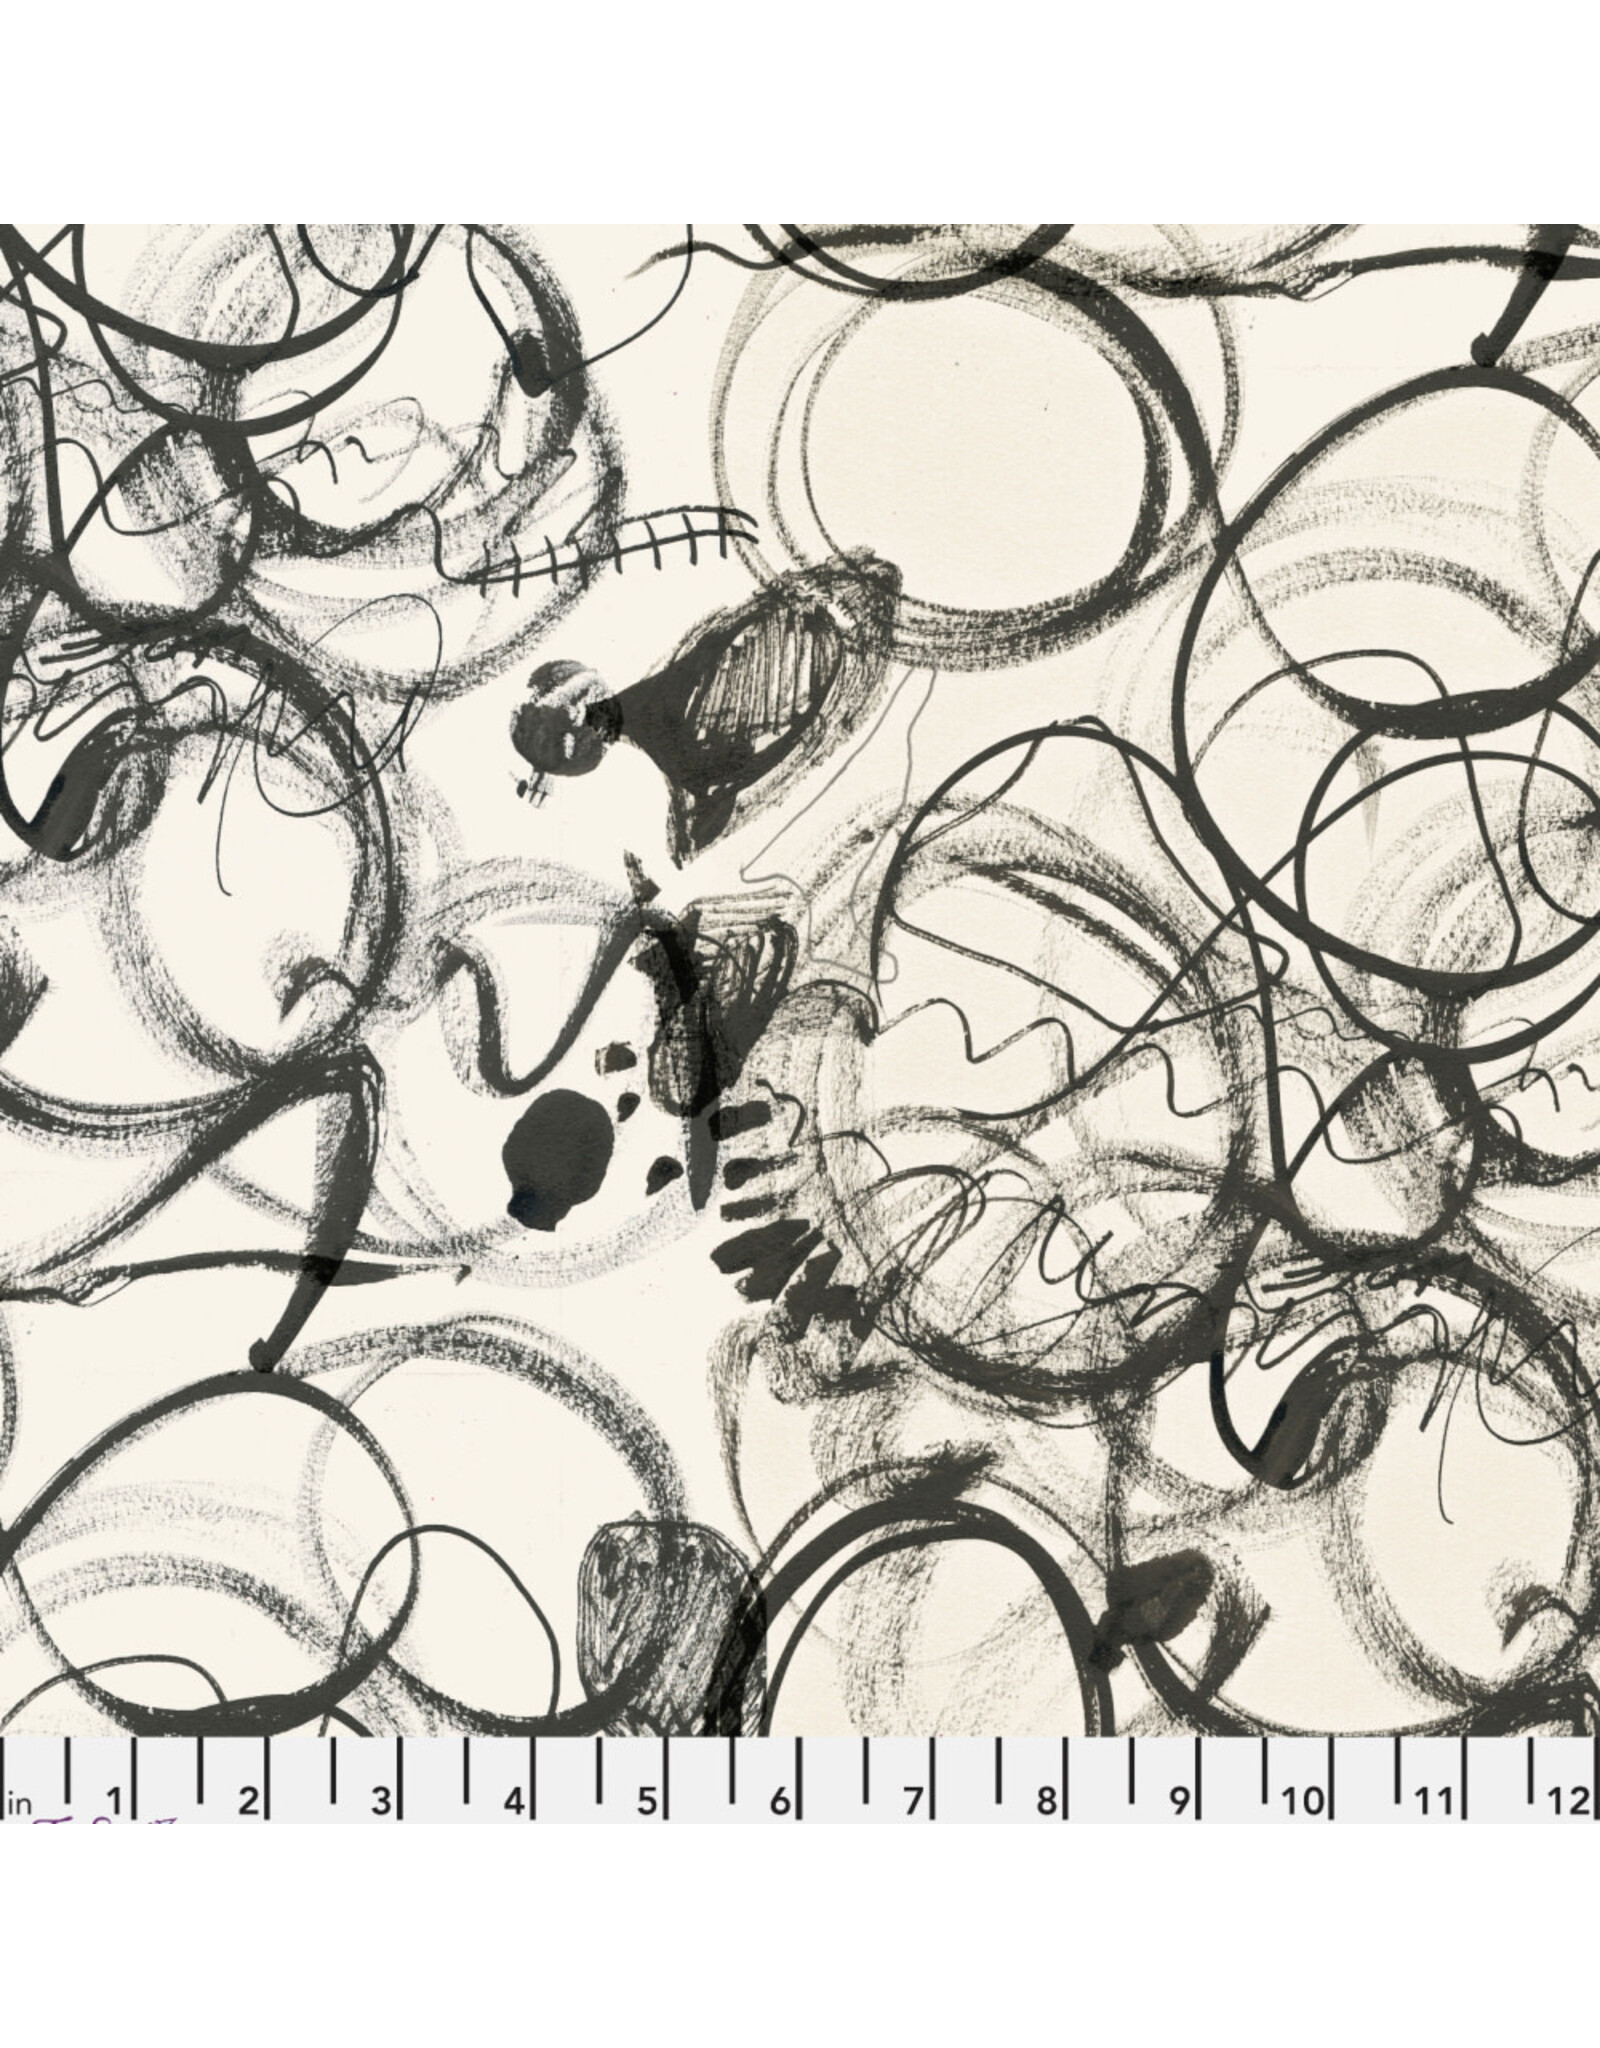 PD's e bond Collection Ravel, Scribble in Charcoal, Dinner Napkin